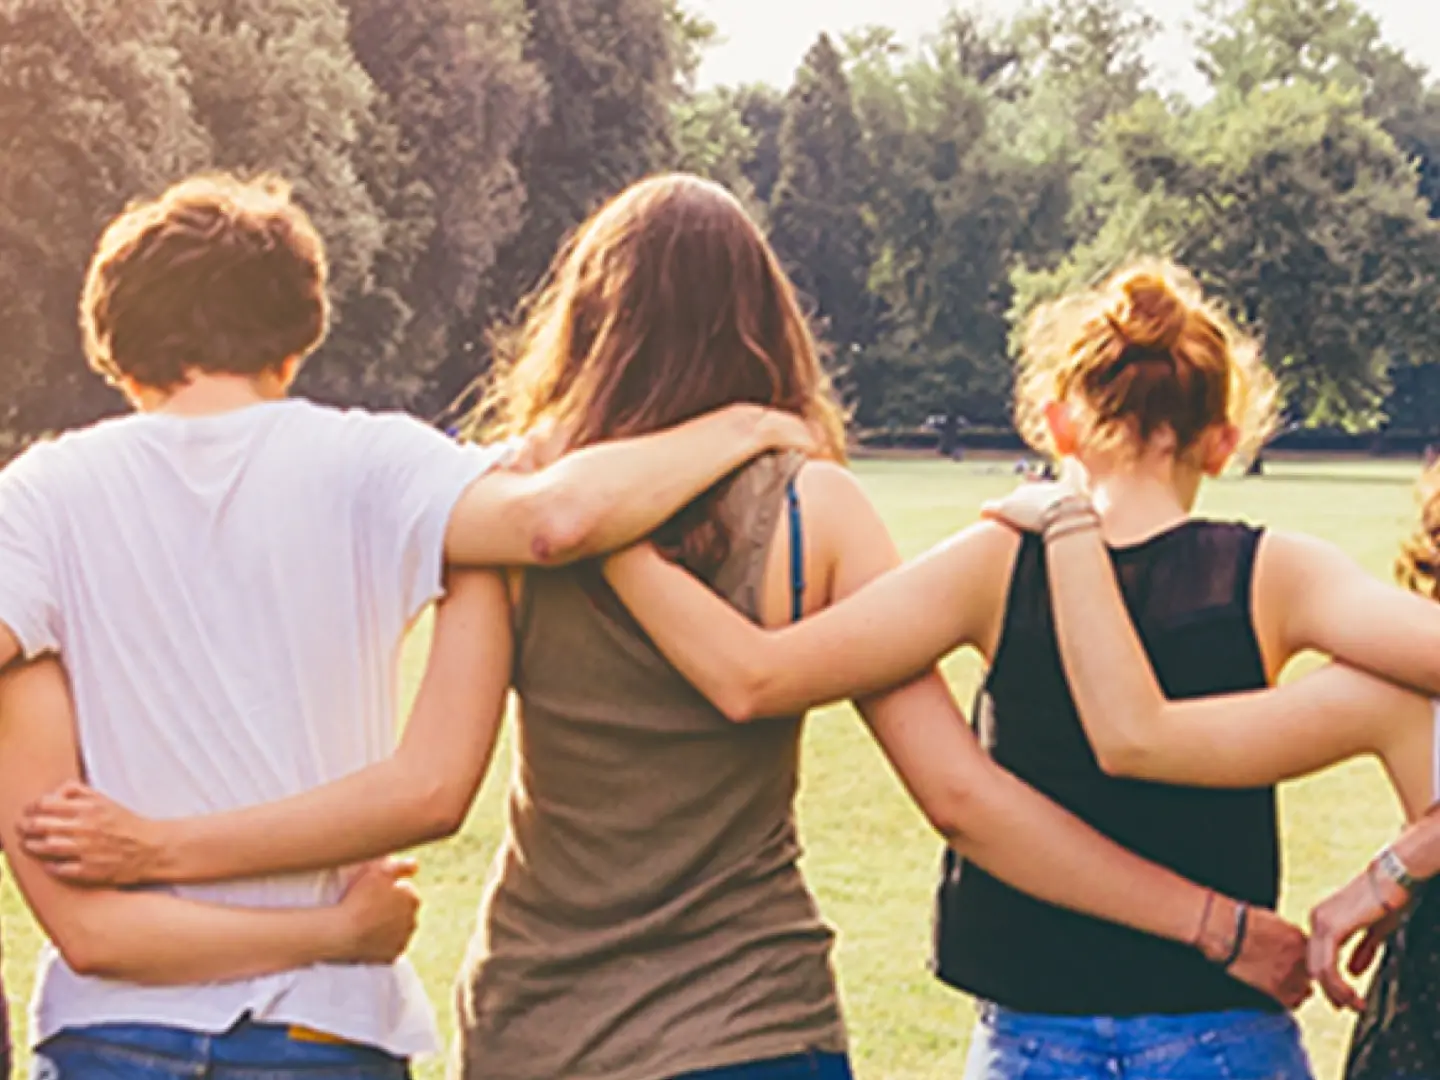 \group of young adults standing in a park linking arms